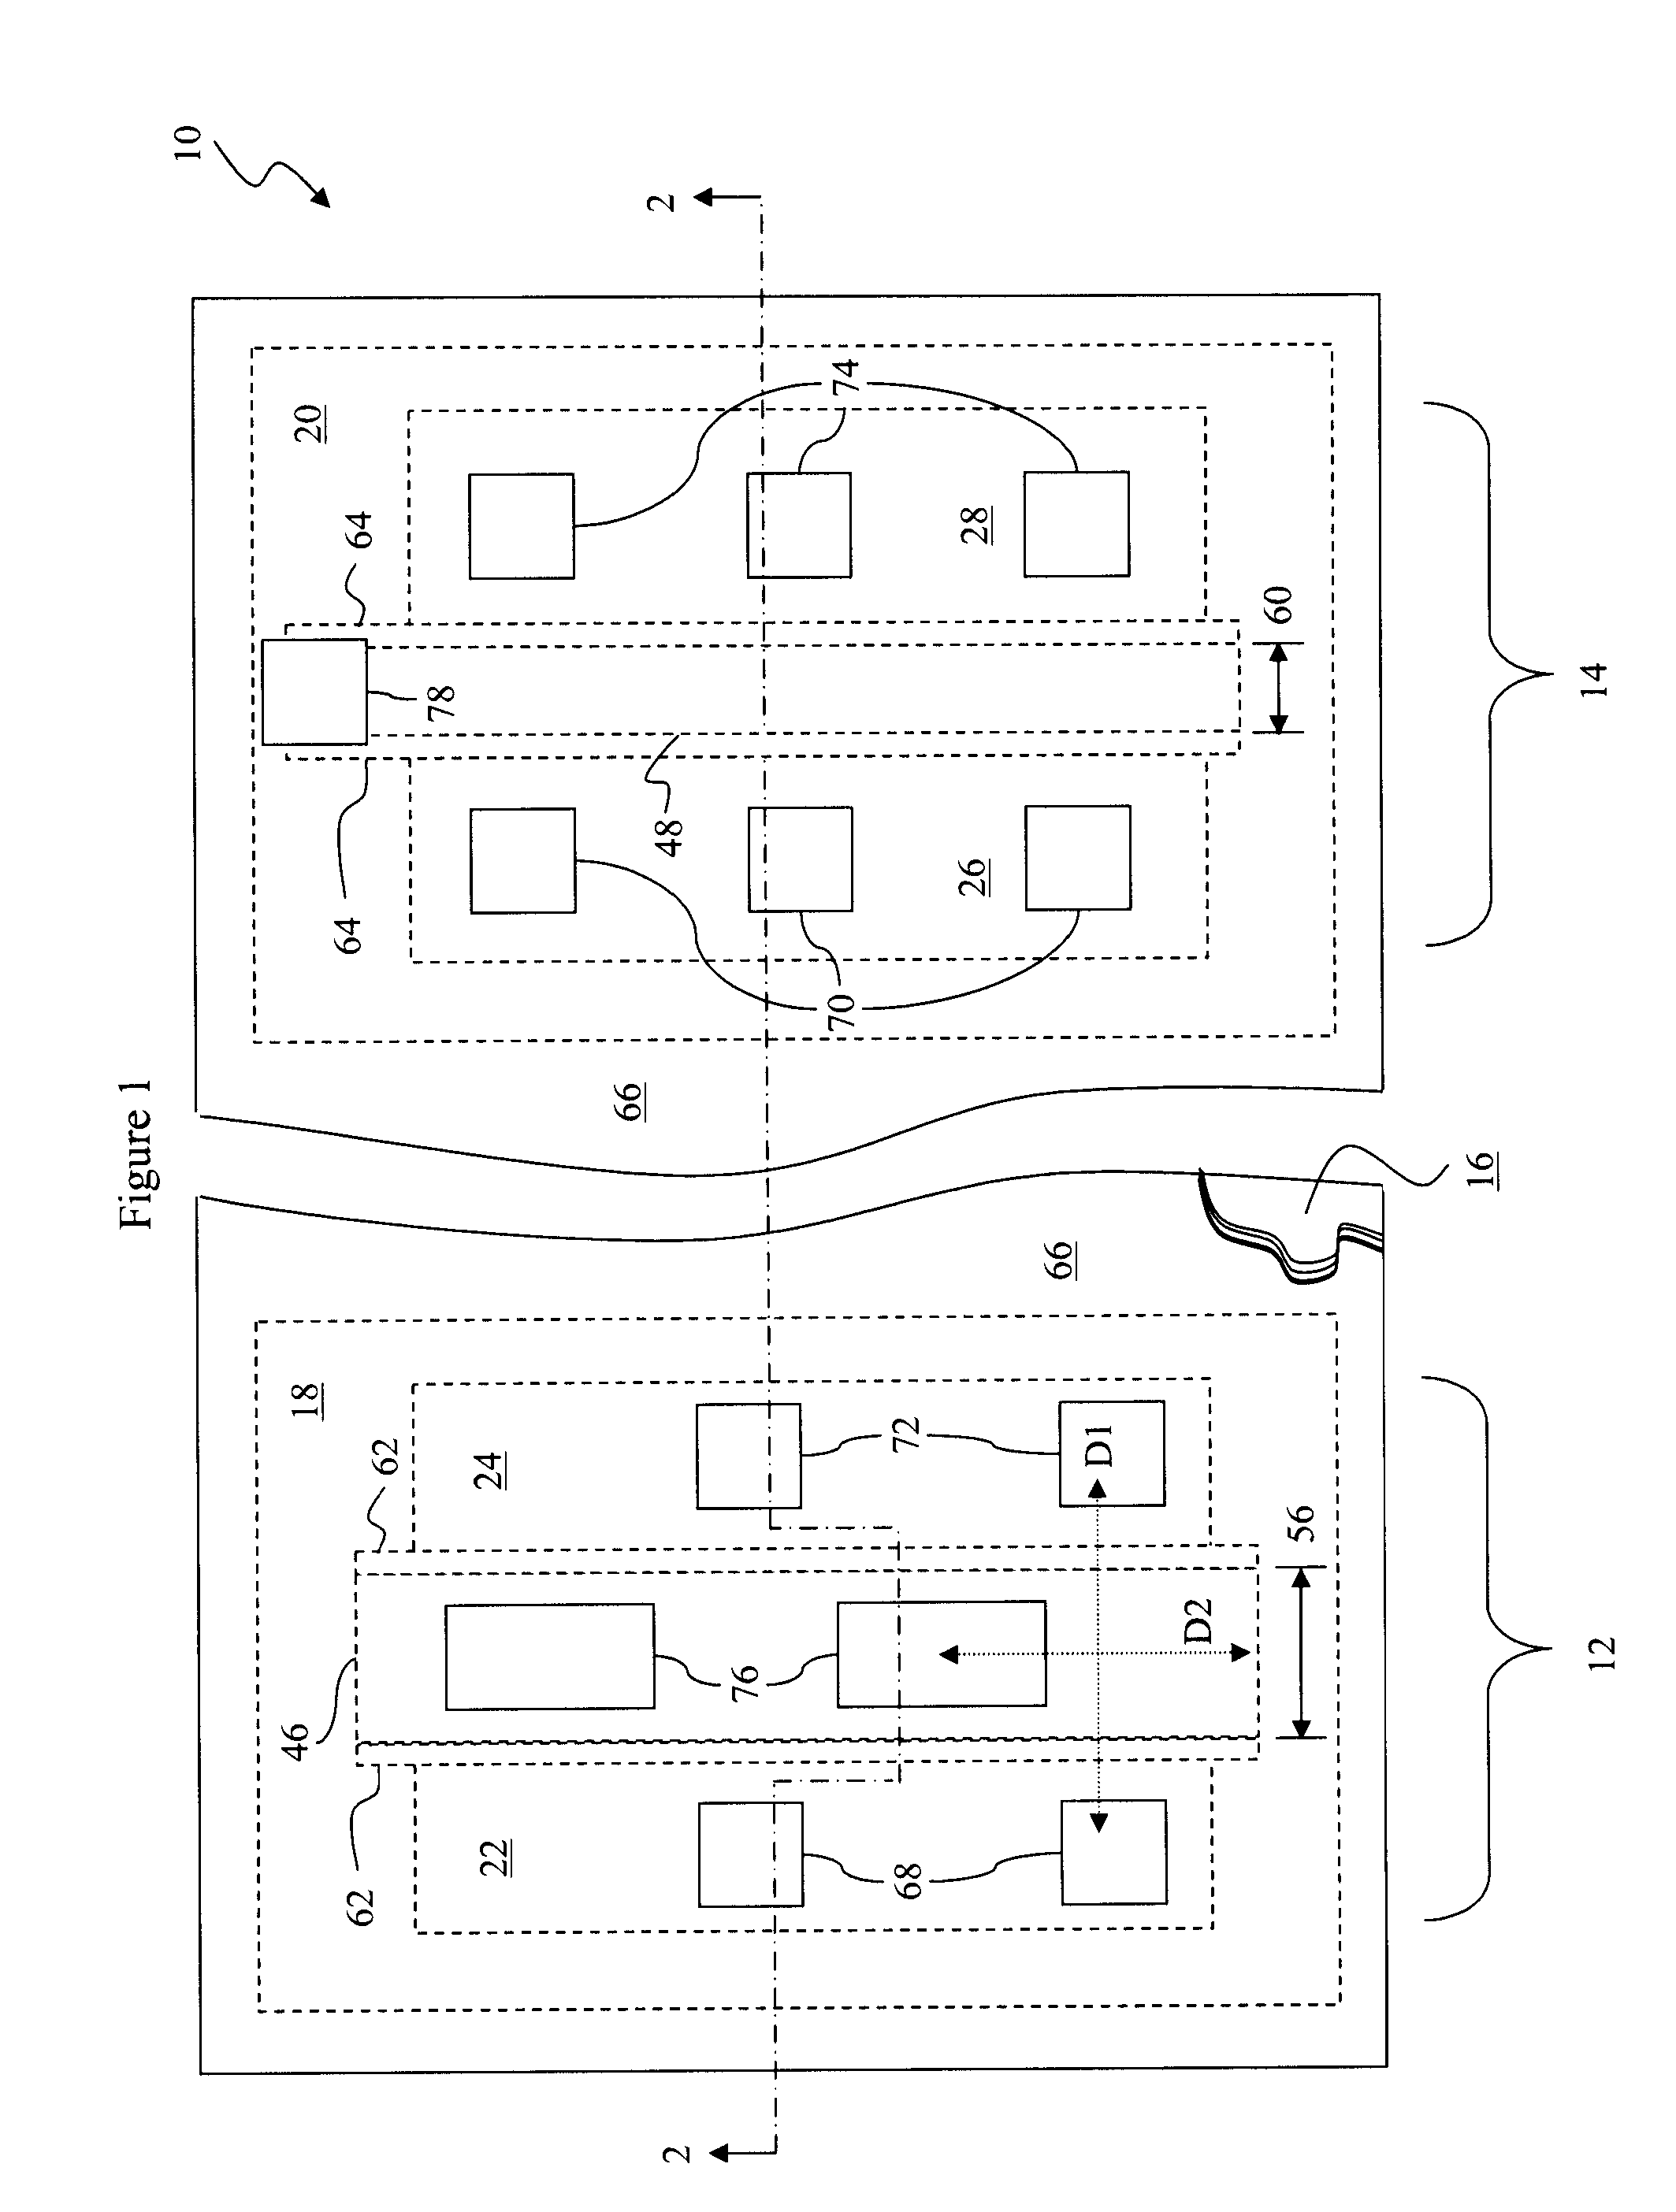 Method and apparatus for reducing gate resistance